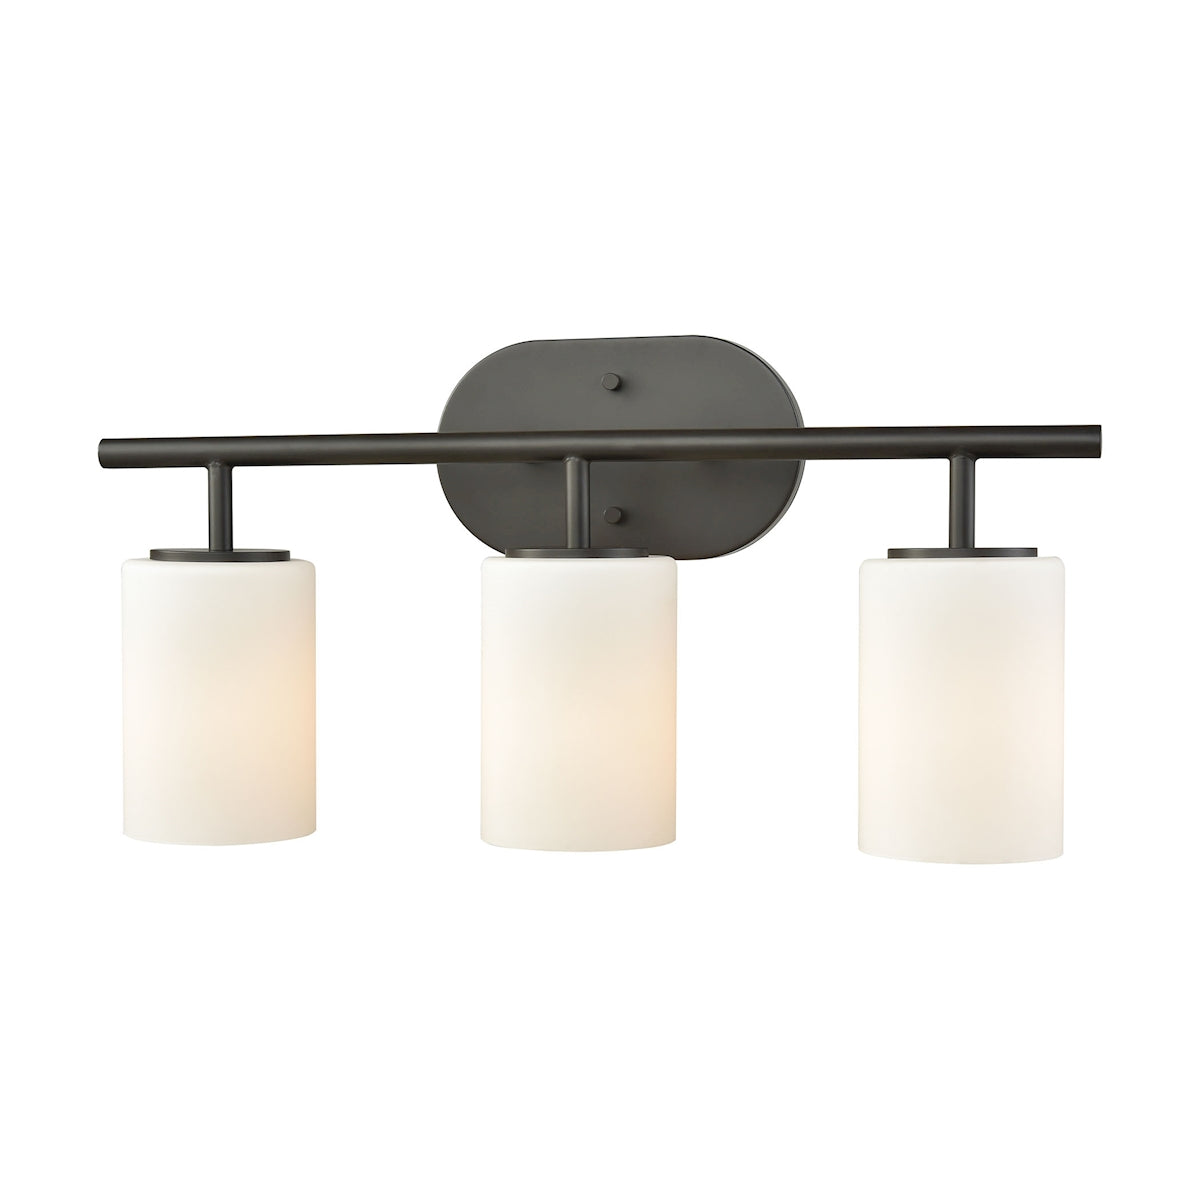 ELK Lighting 57142/3 Pemlico 3-Light Vanity Lamp in Oil Rubbed Bronze with White Glass